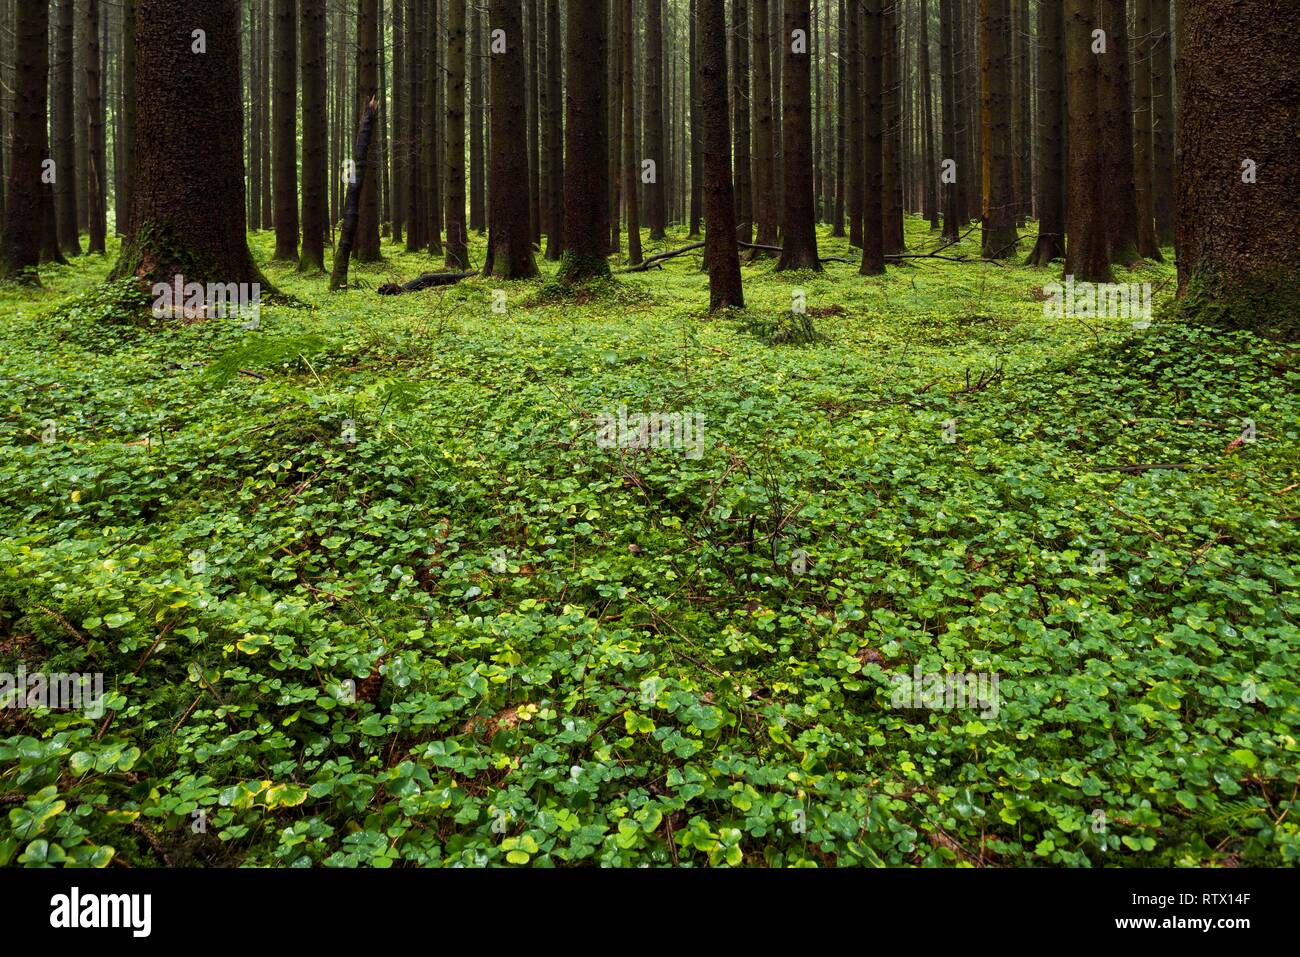 Clover leaves (Trifolium) on forest floor in Spruces forest (Picea), Bavaria, Germany Stock Photo